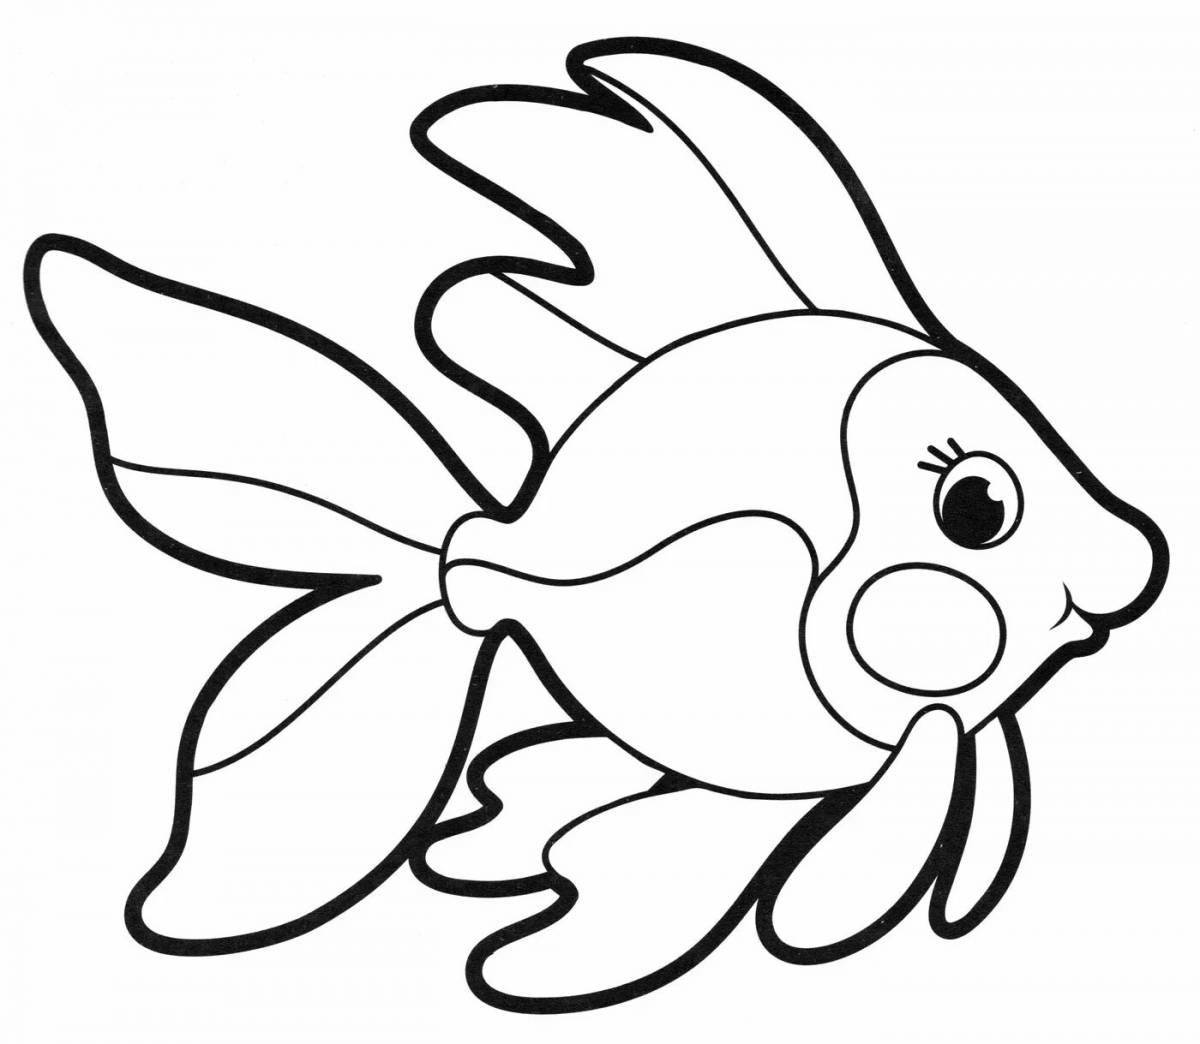 Outstanding goldfish coloring page for preschoolers